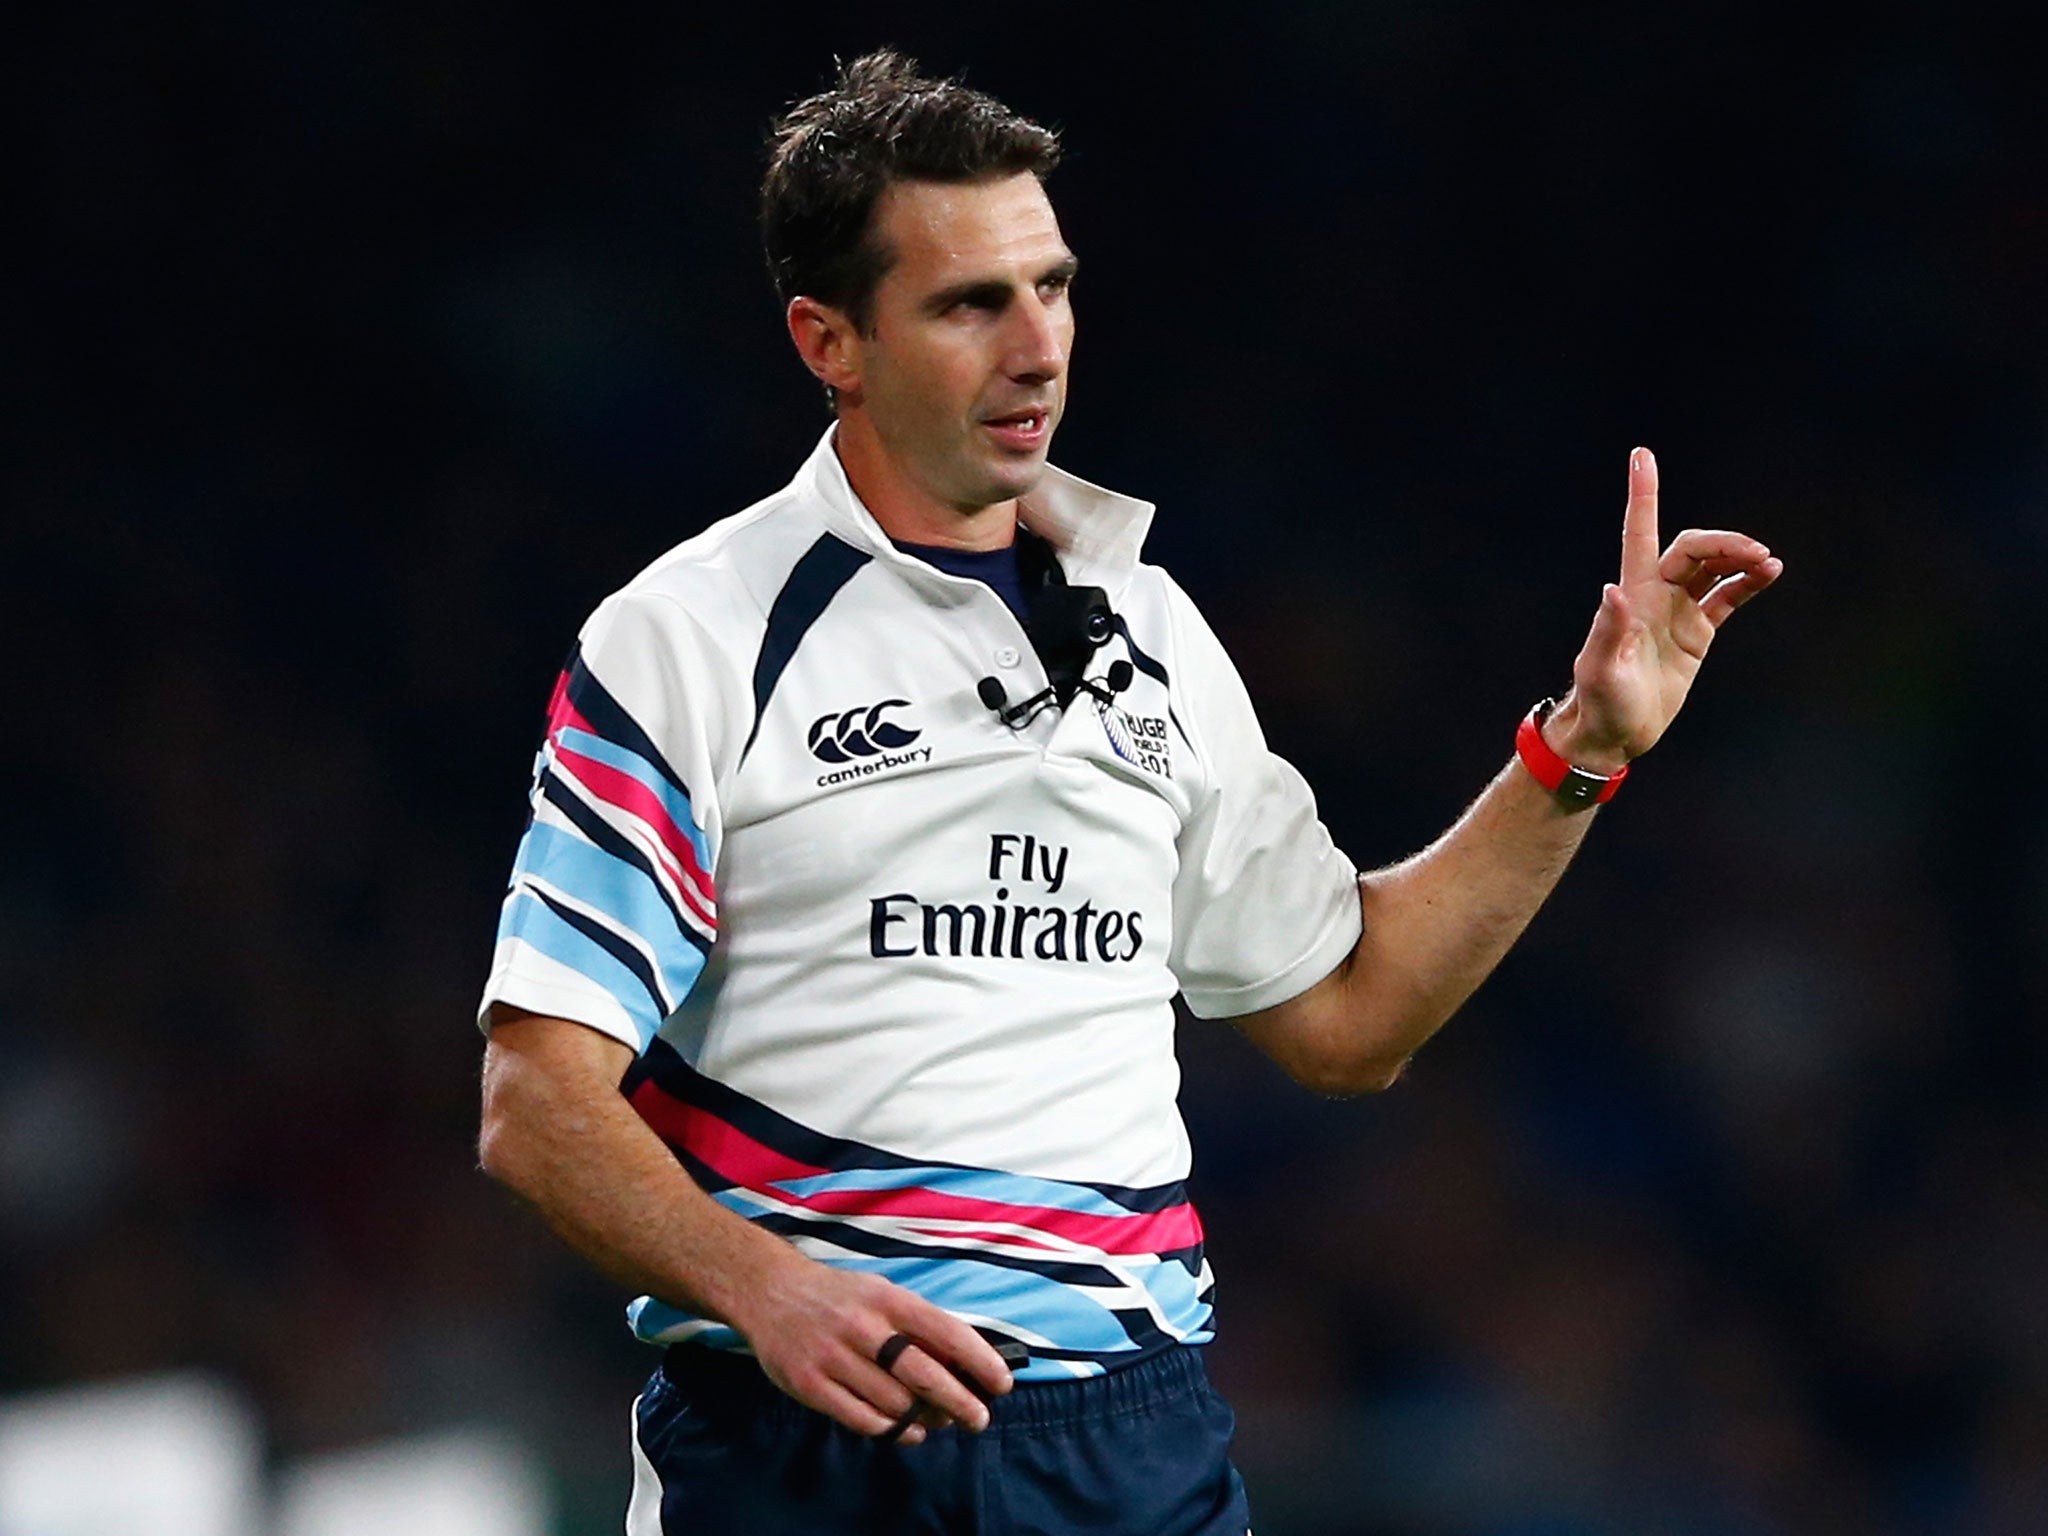 Referee Craig Joubert refers a decision to the TMO during the 2015 Rugby World Cup Pool D match between France and Italy